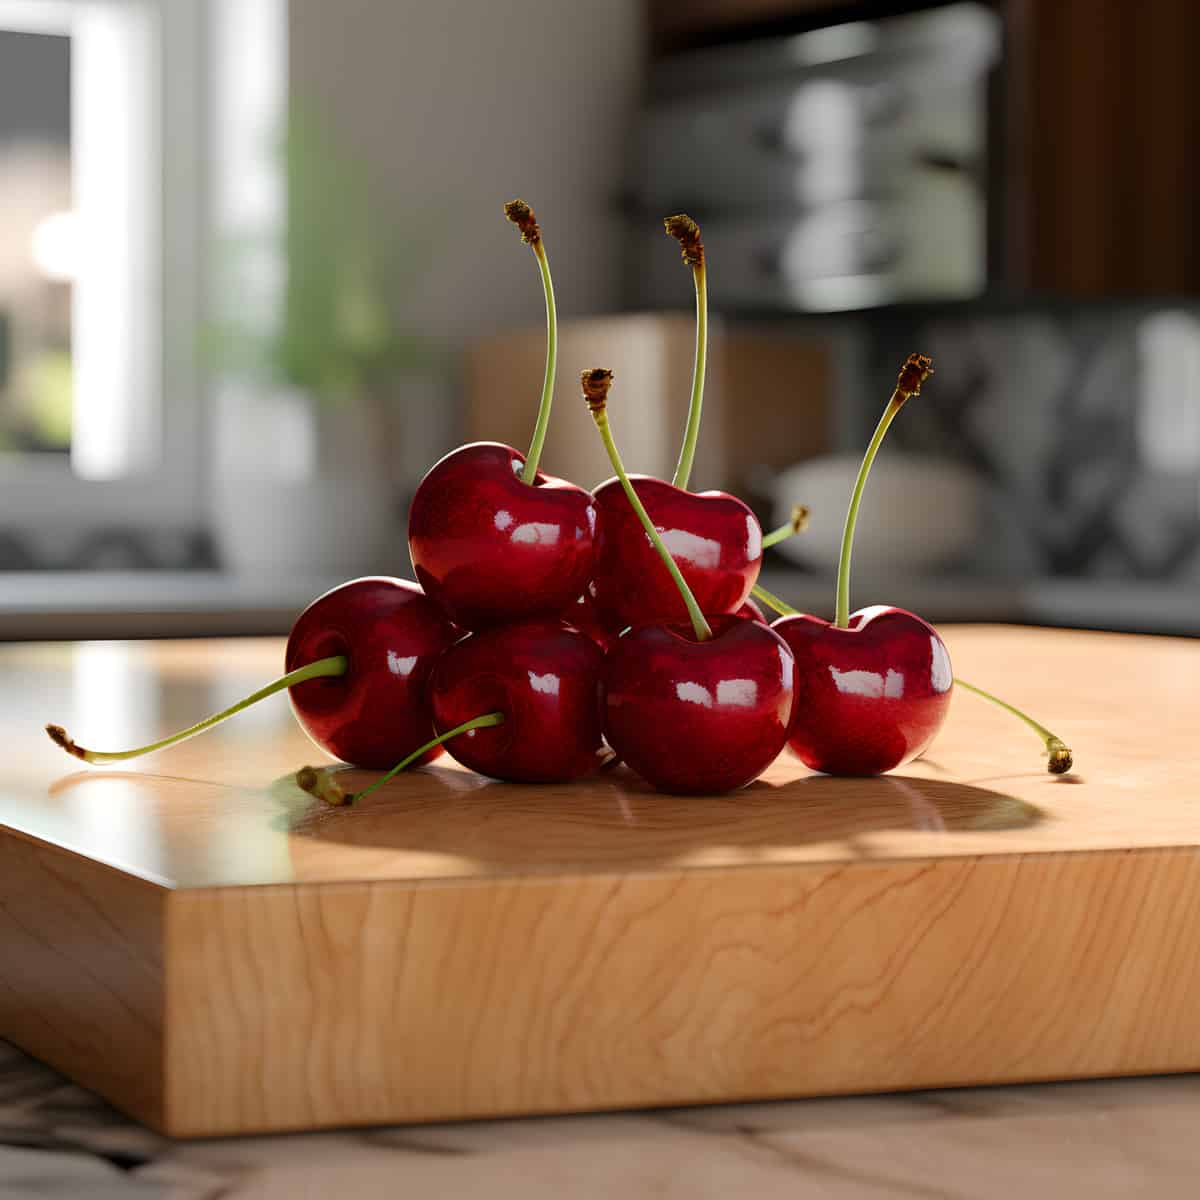 Dawyck Cherries on a kitchen counter